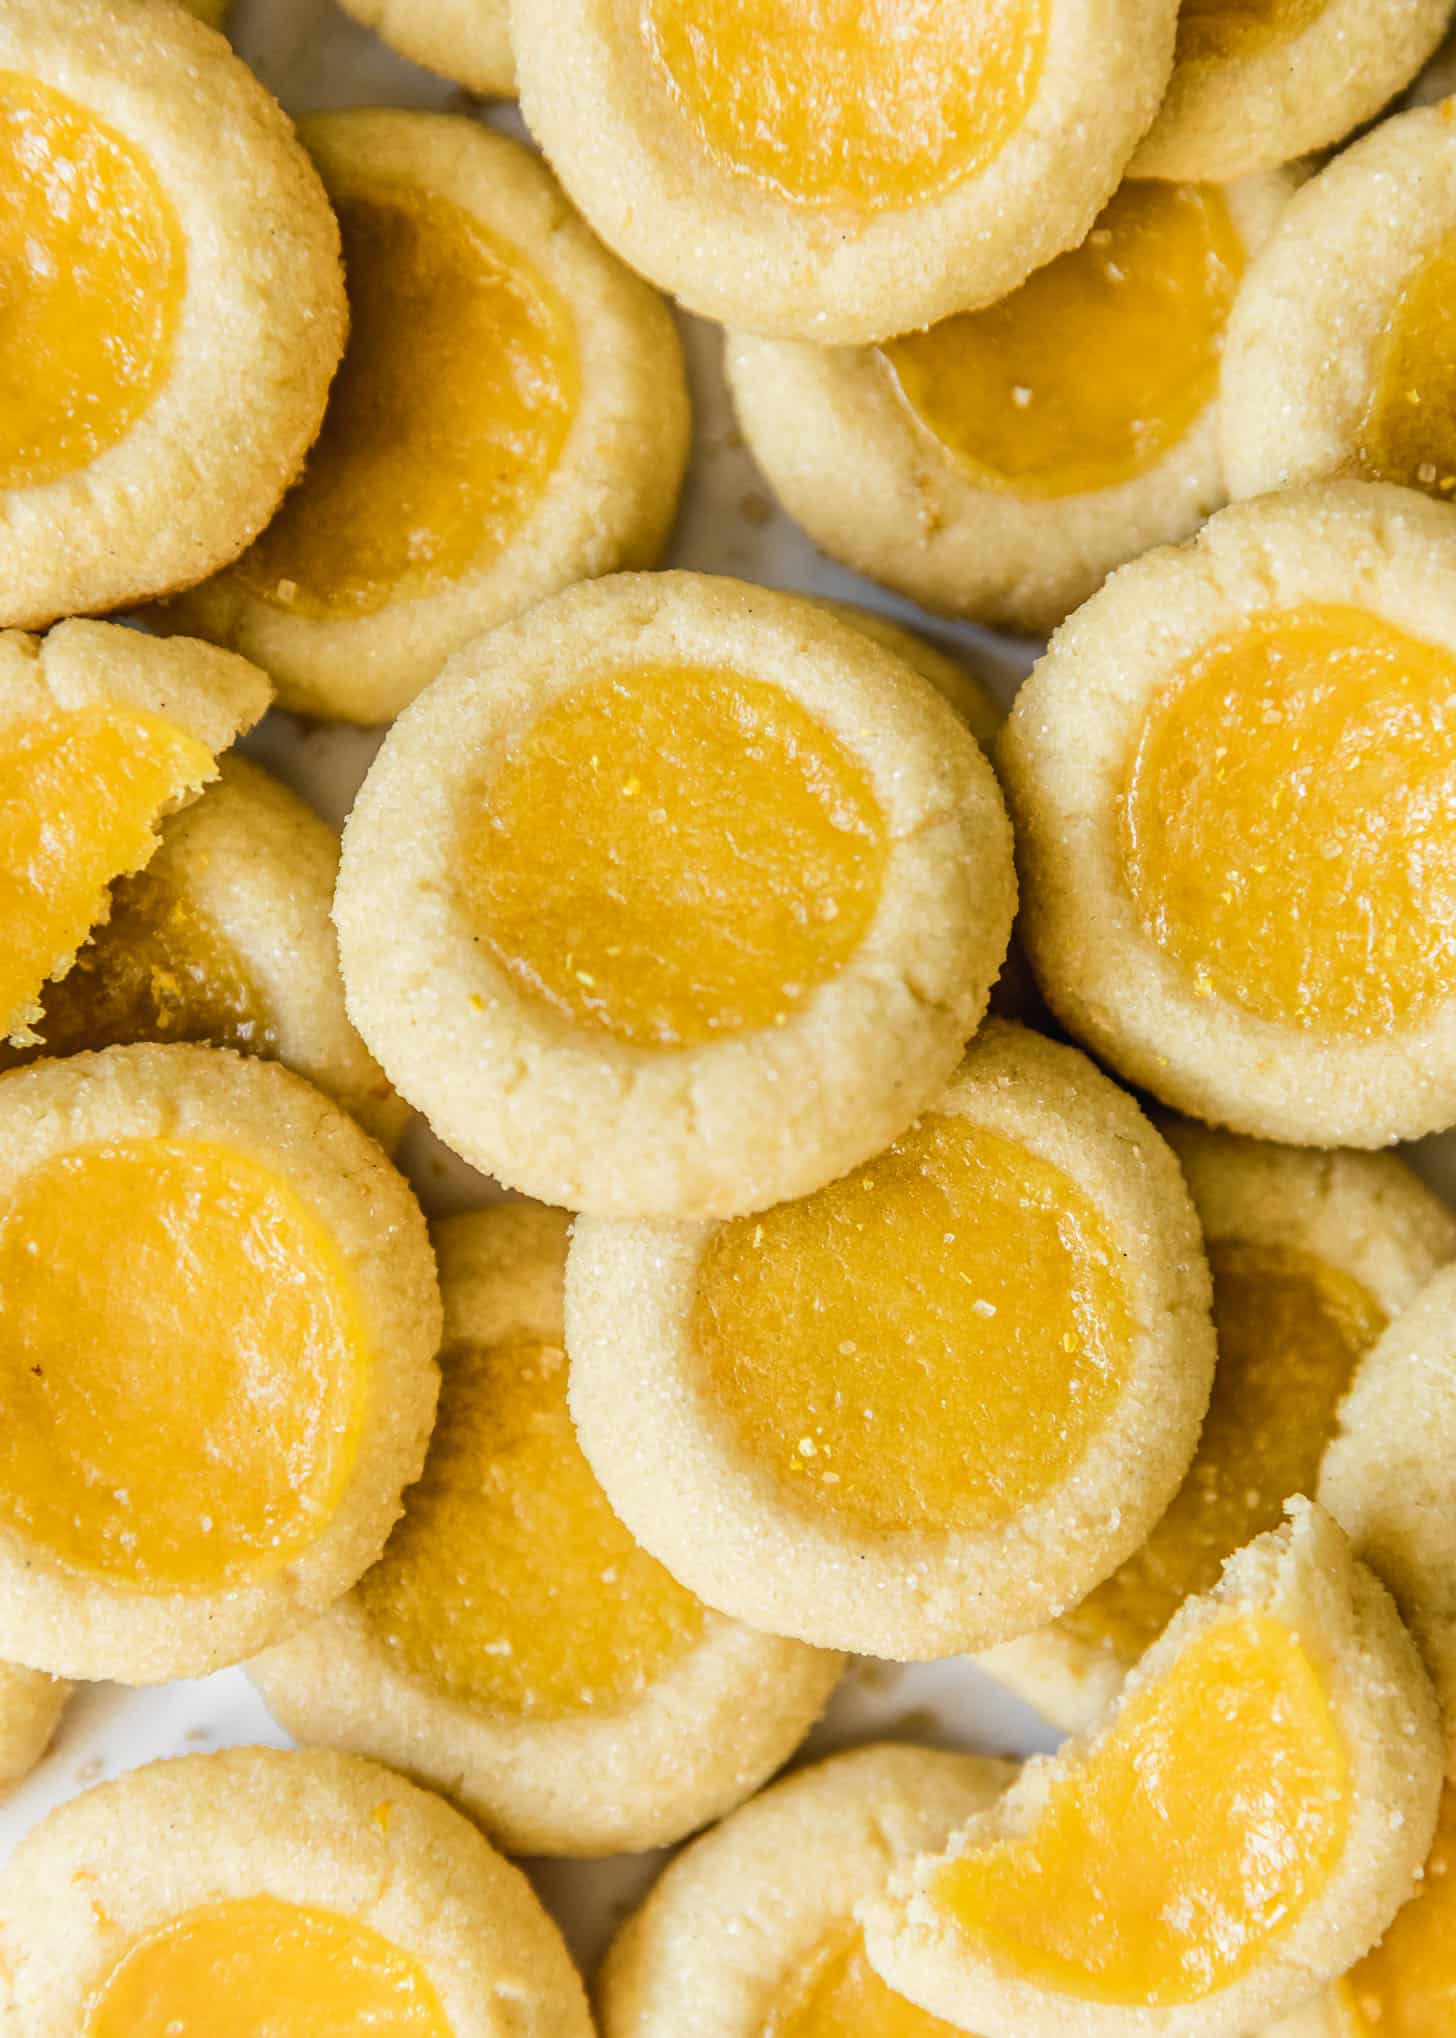 Piles of thumbprint lemon curd cookies on a white background.